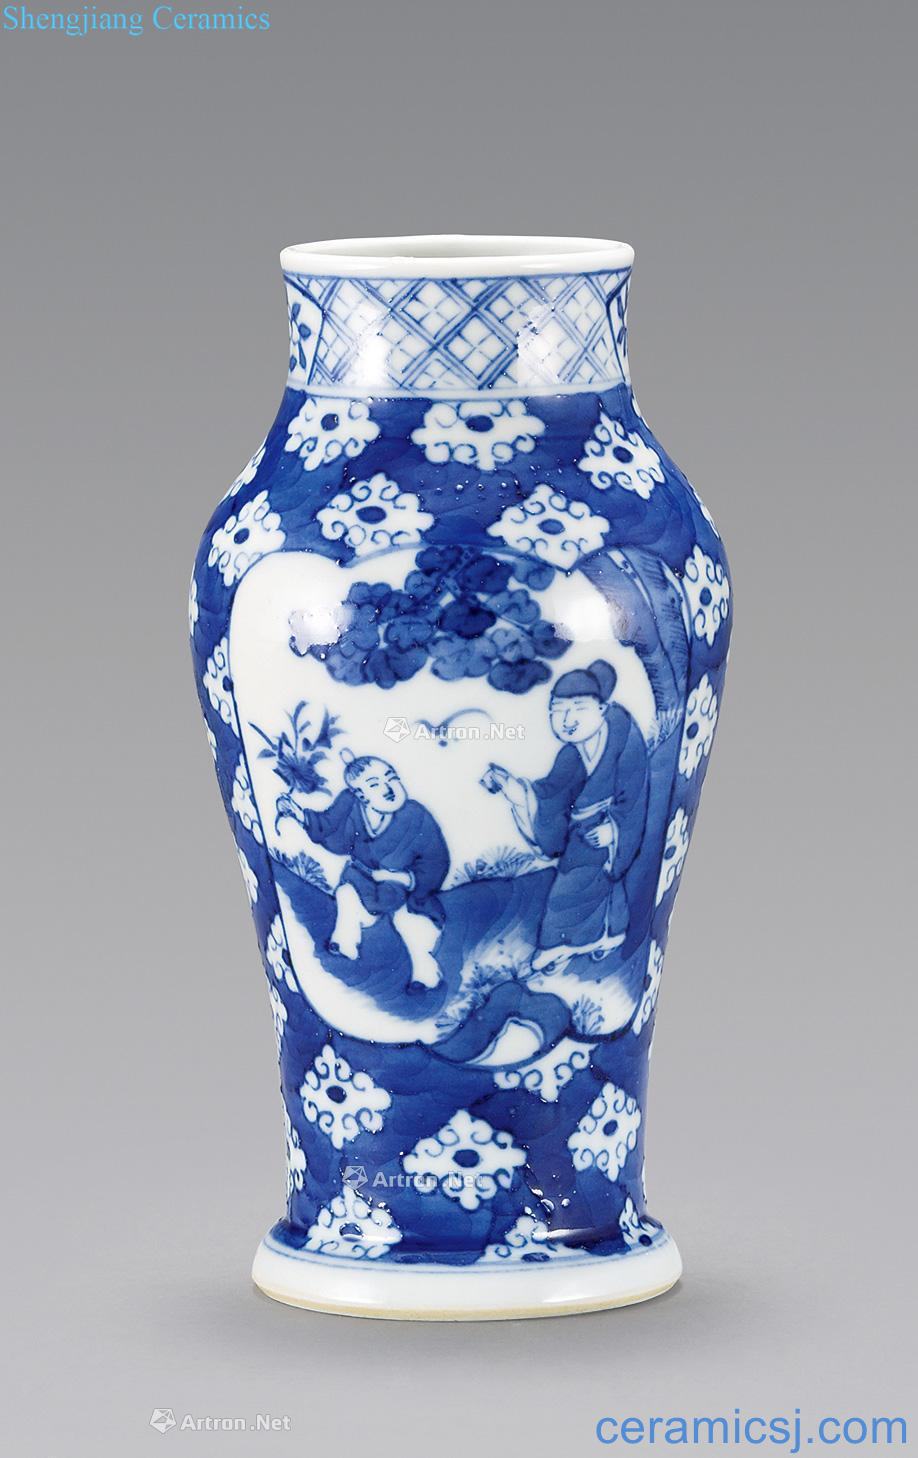 Qing guangxu Blue and white bottle medallion characters